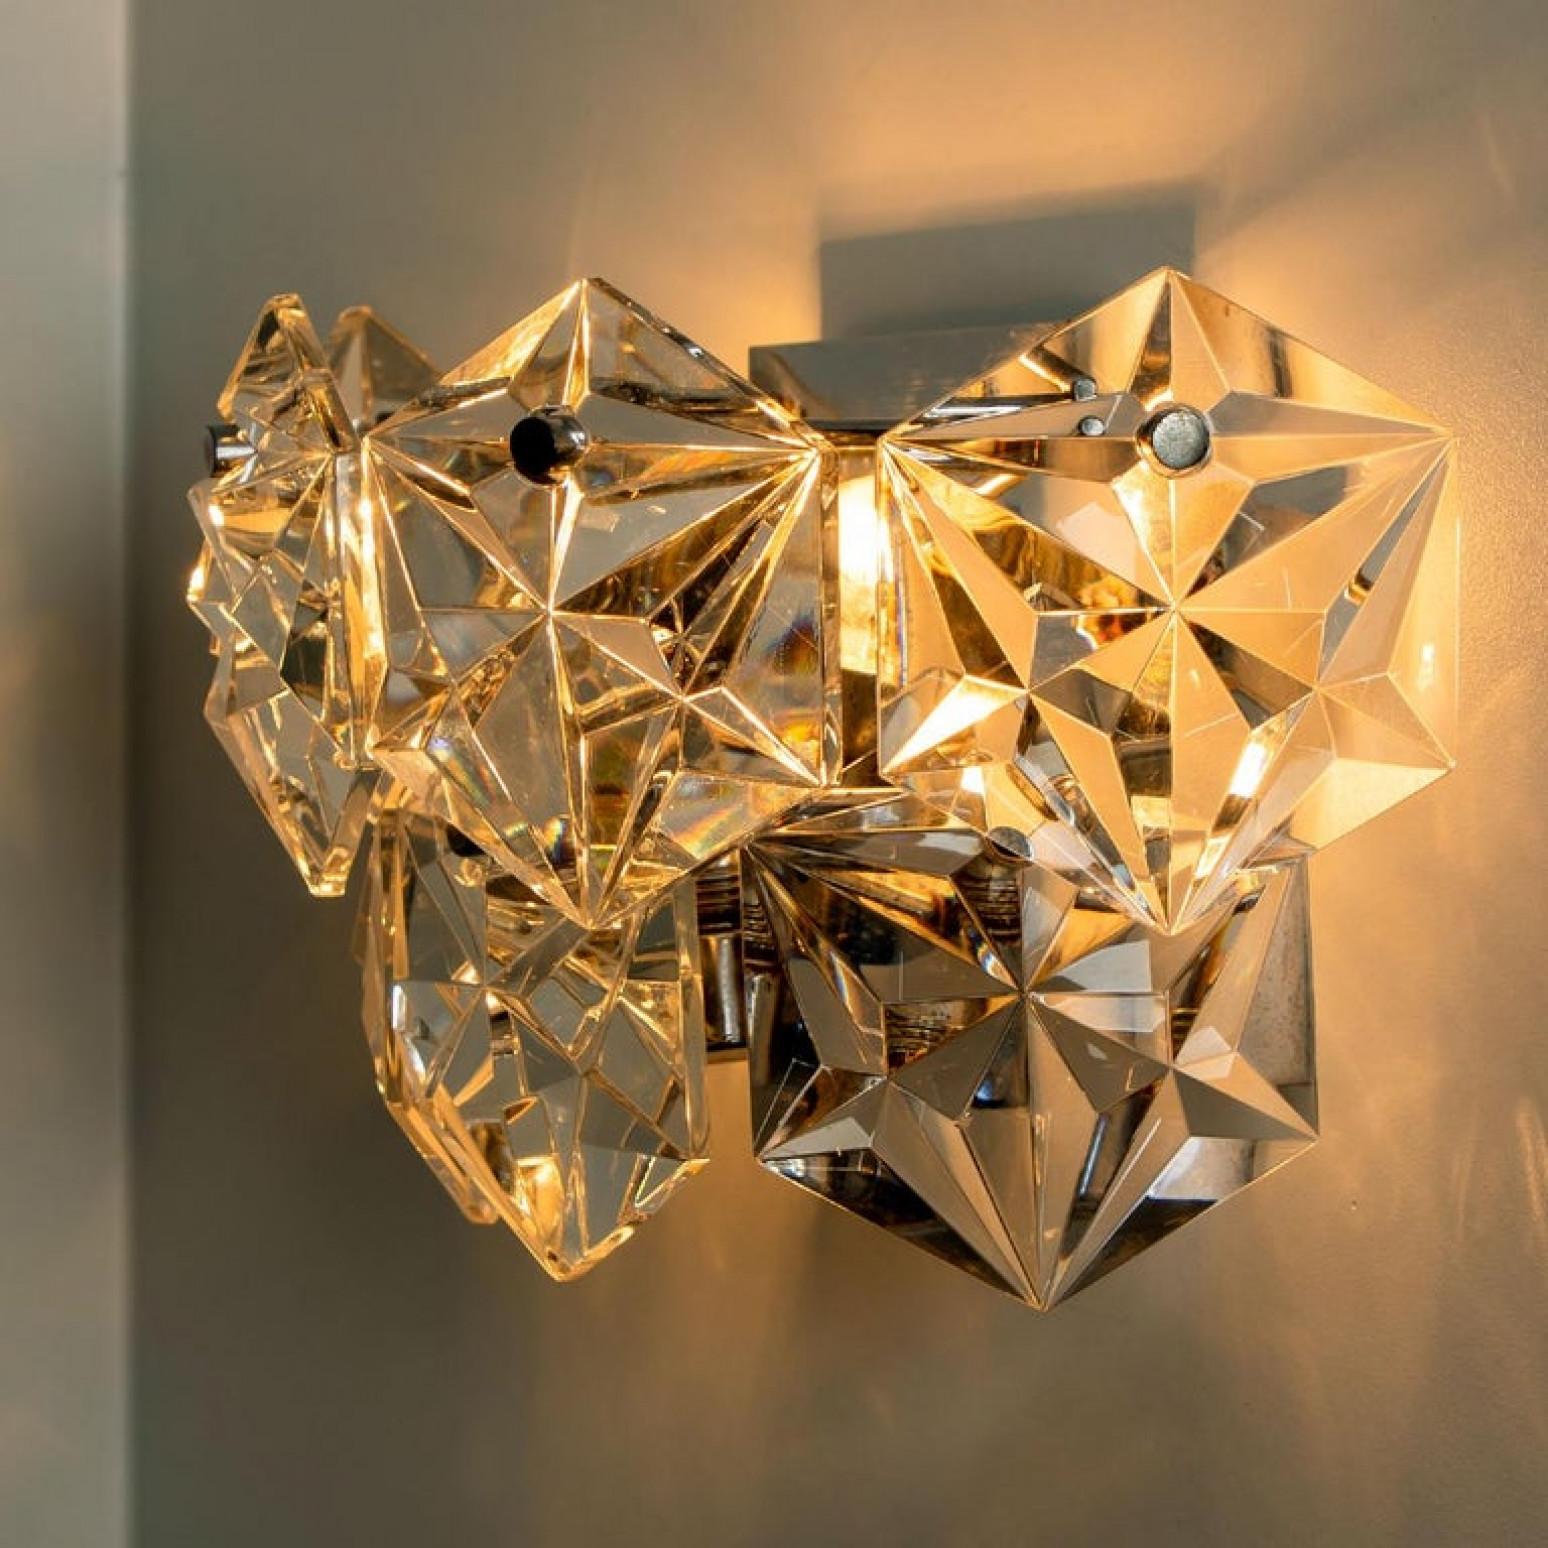 1 of the 4 Faceted Crystal and Chrome Sconces by Kinkeldey, Germany, 1970s For Sale 3